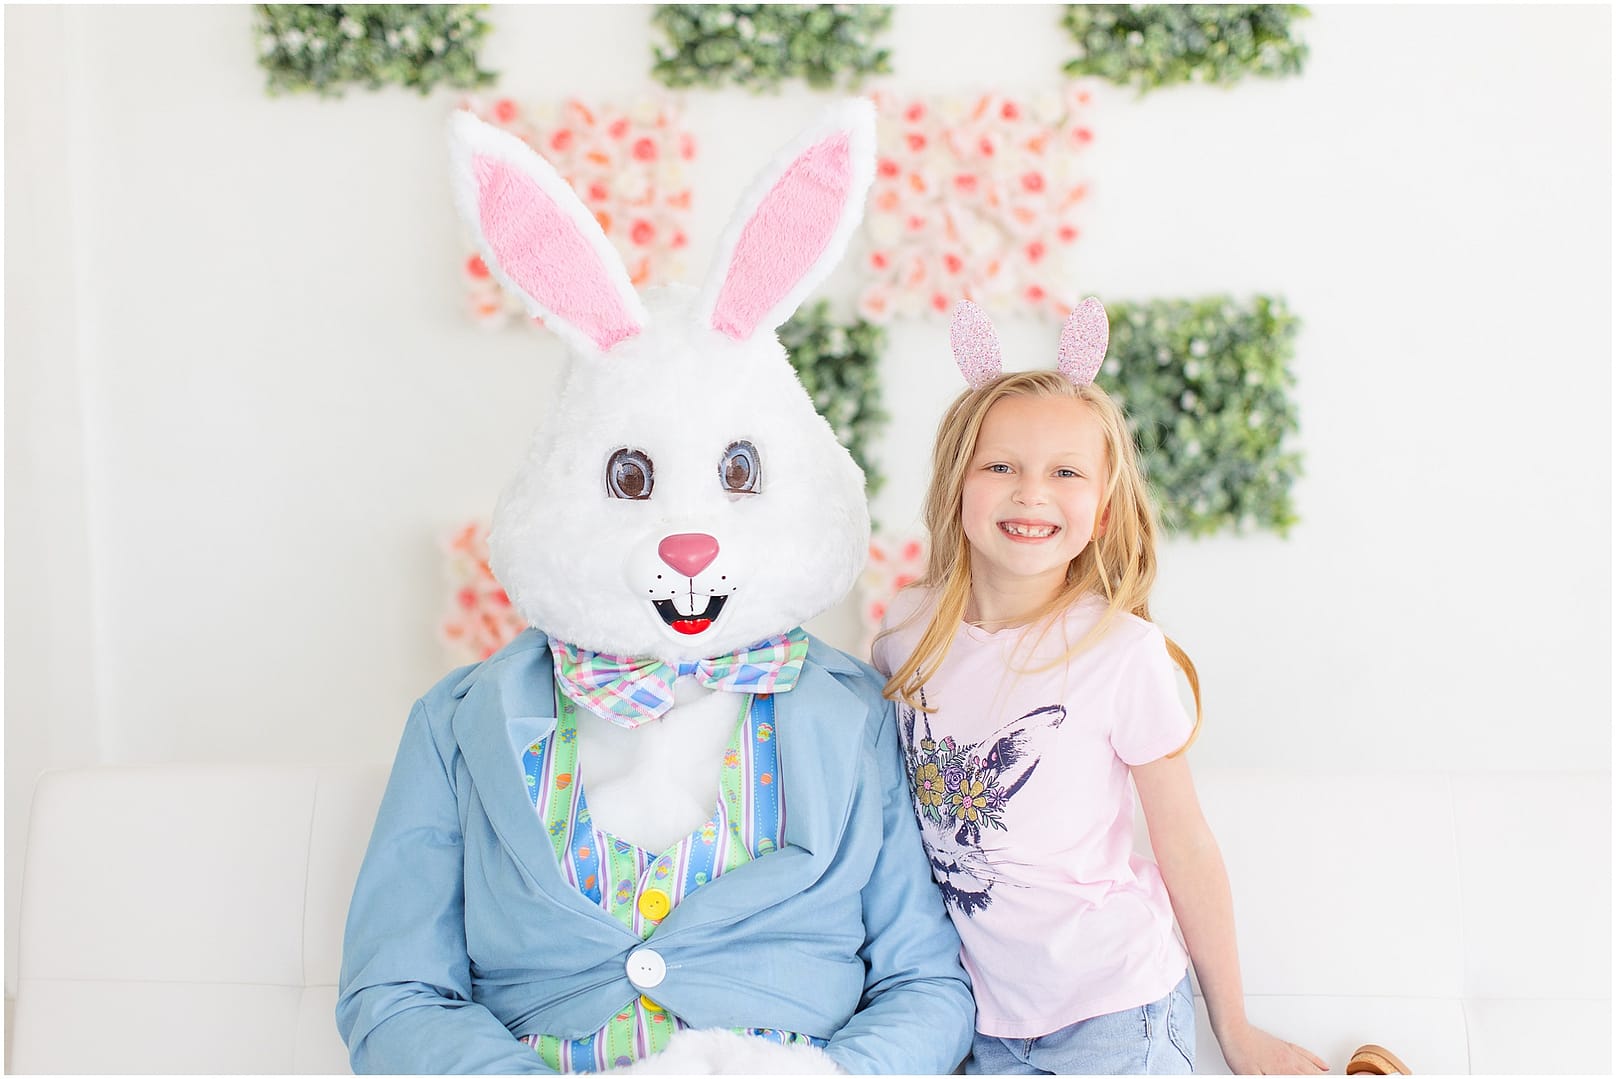 Young girl smiles while sitting next to the Easter Bunny. Photo by Tiffany Hix Photography.